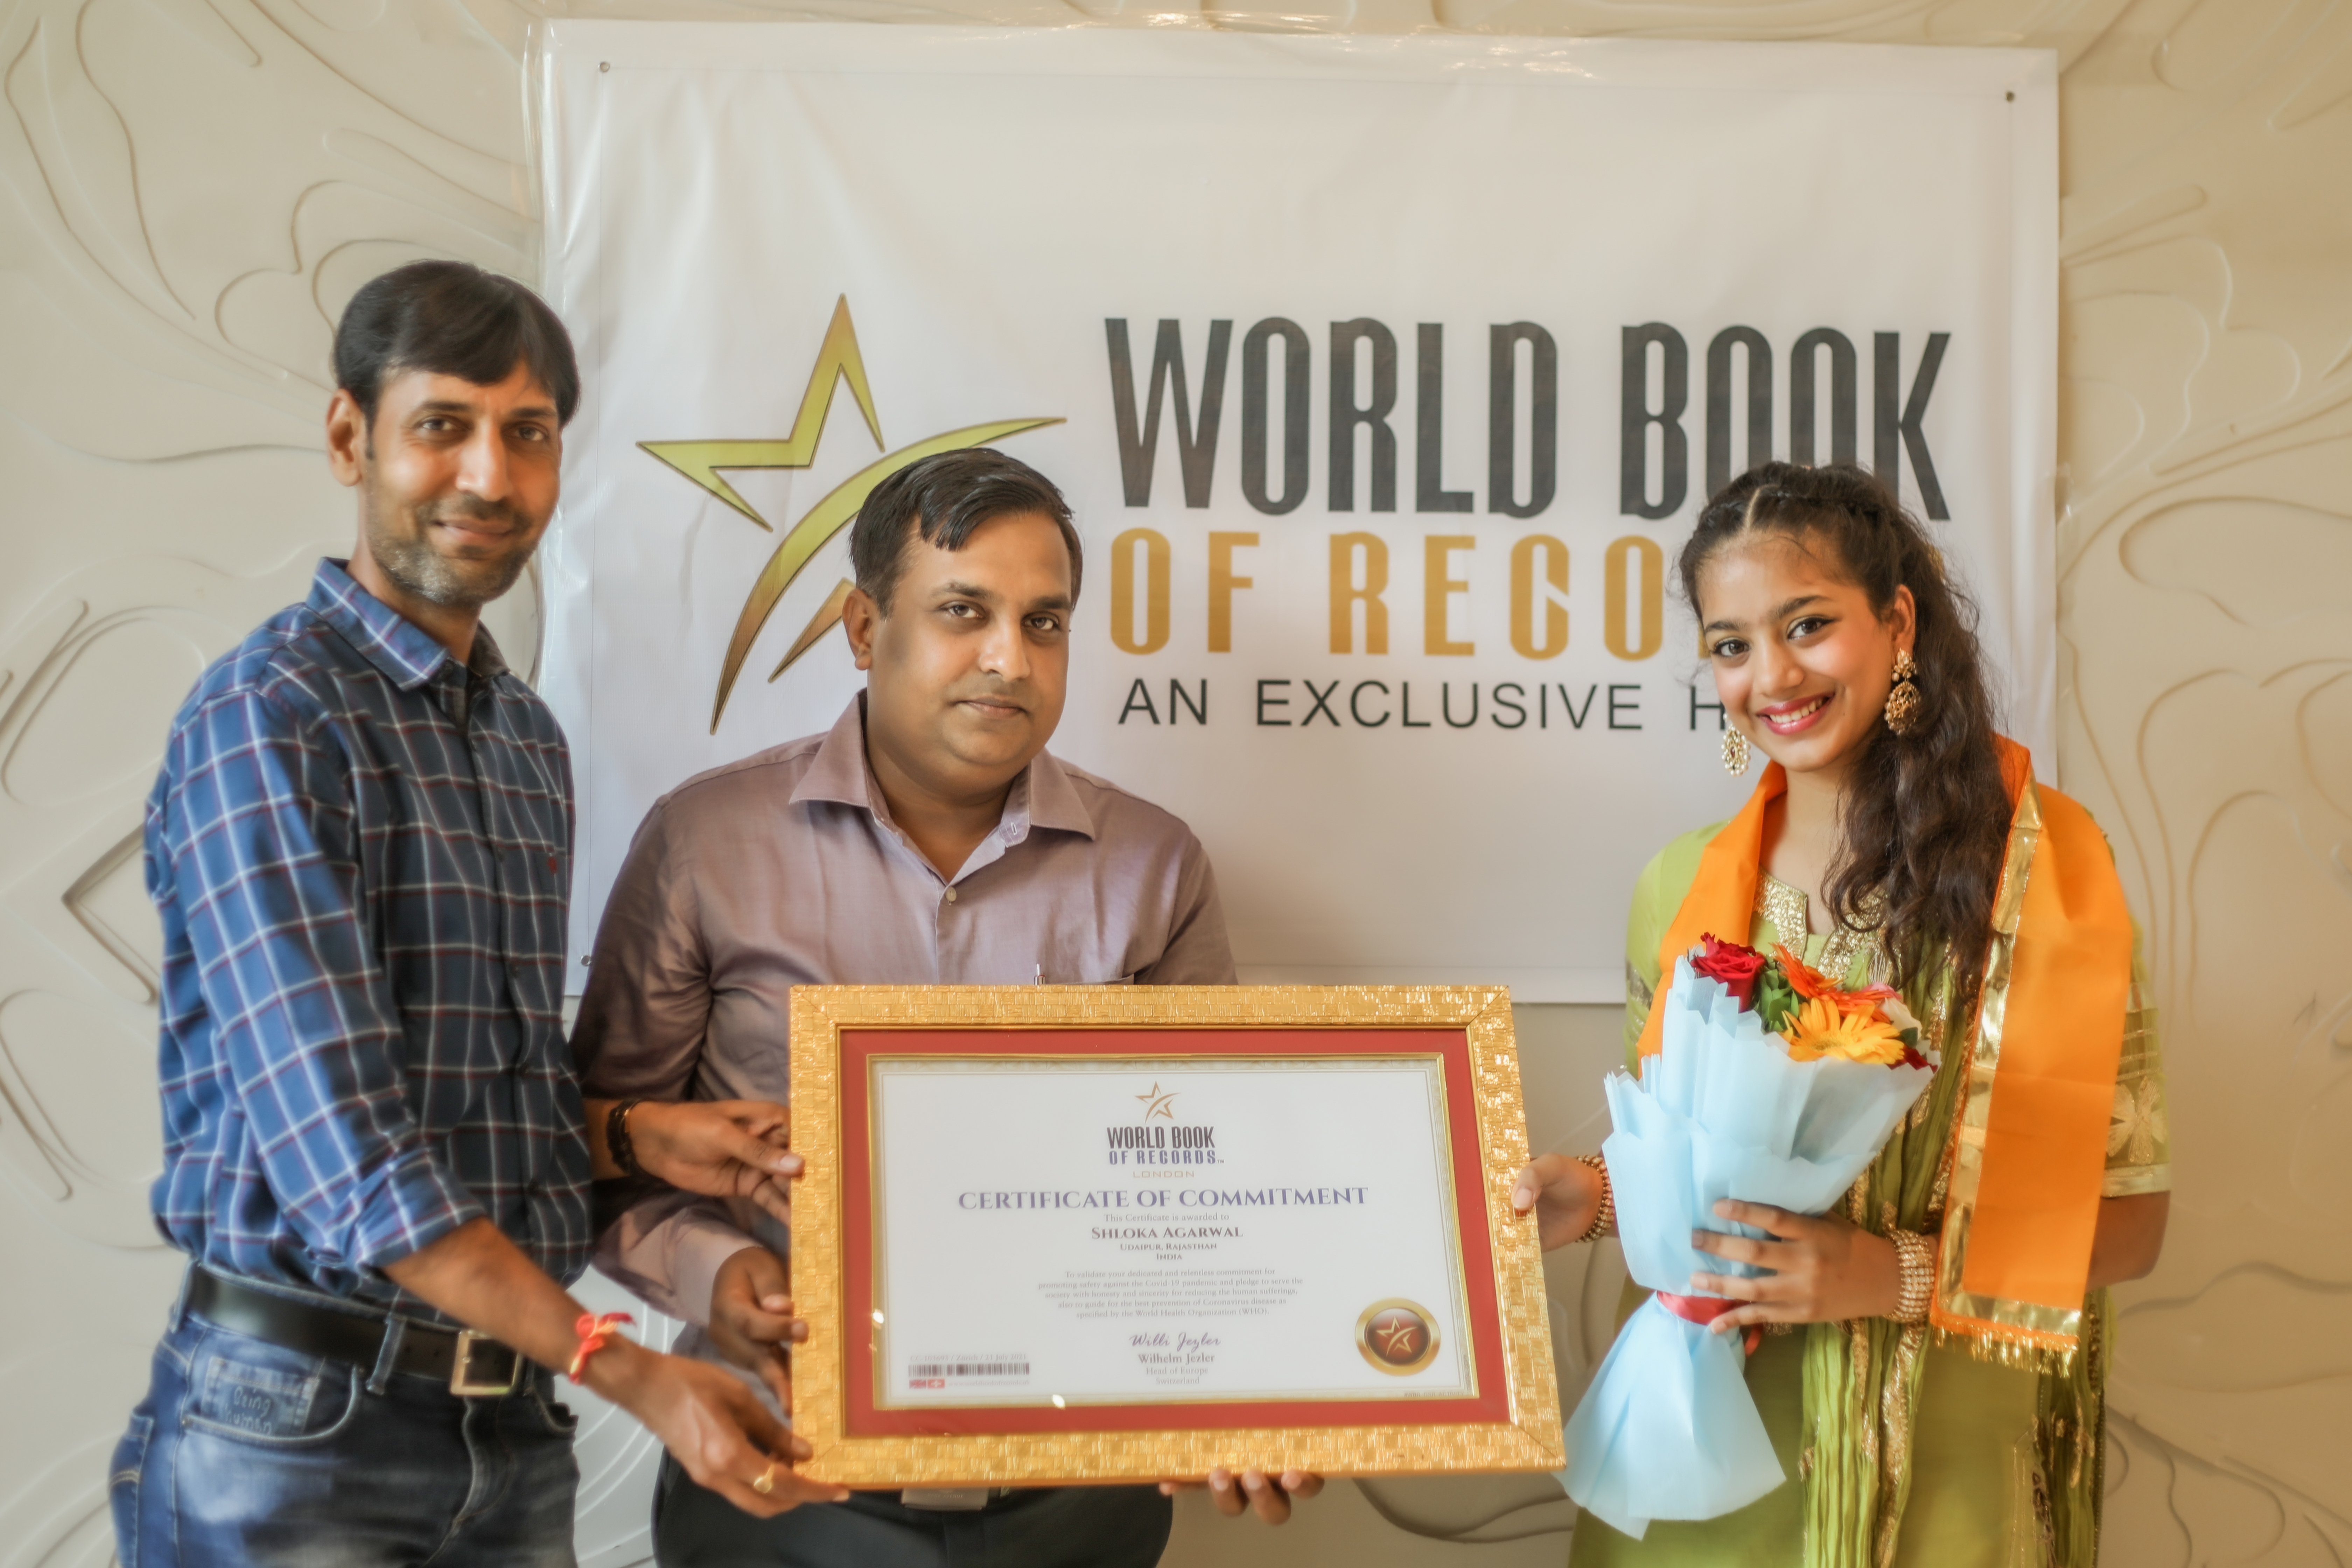 Aman and Shloka awarded with Certificate of Commitment by World Book of Records London